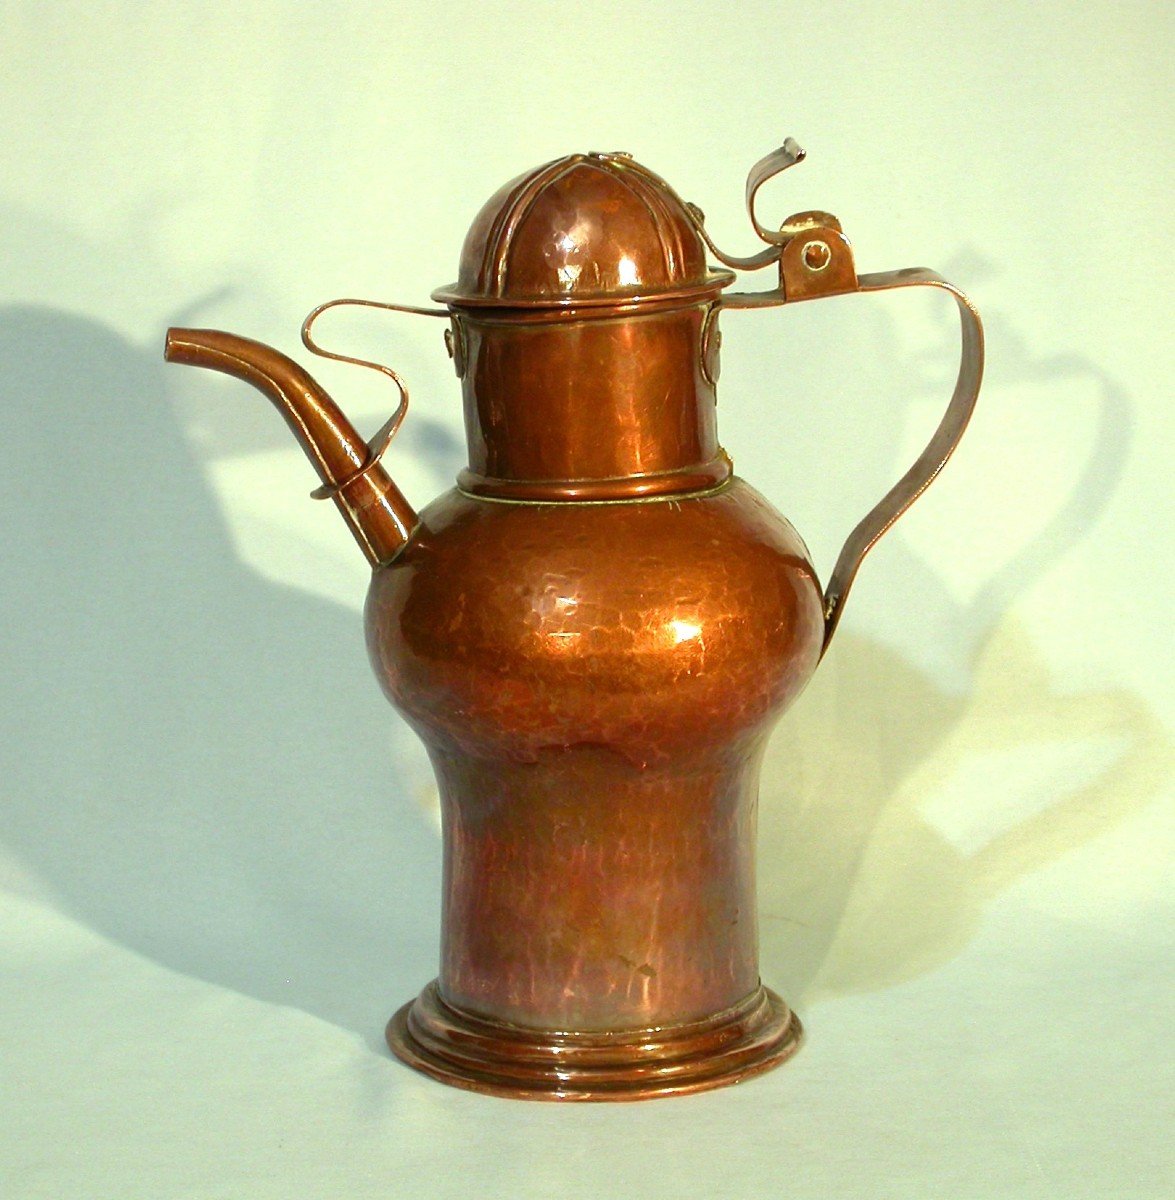 Copper Jug - Early 18th Century